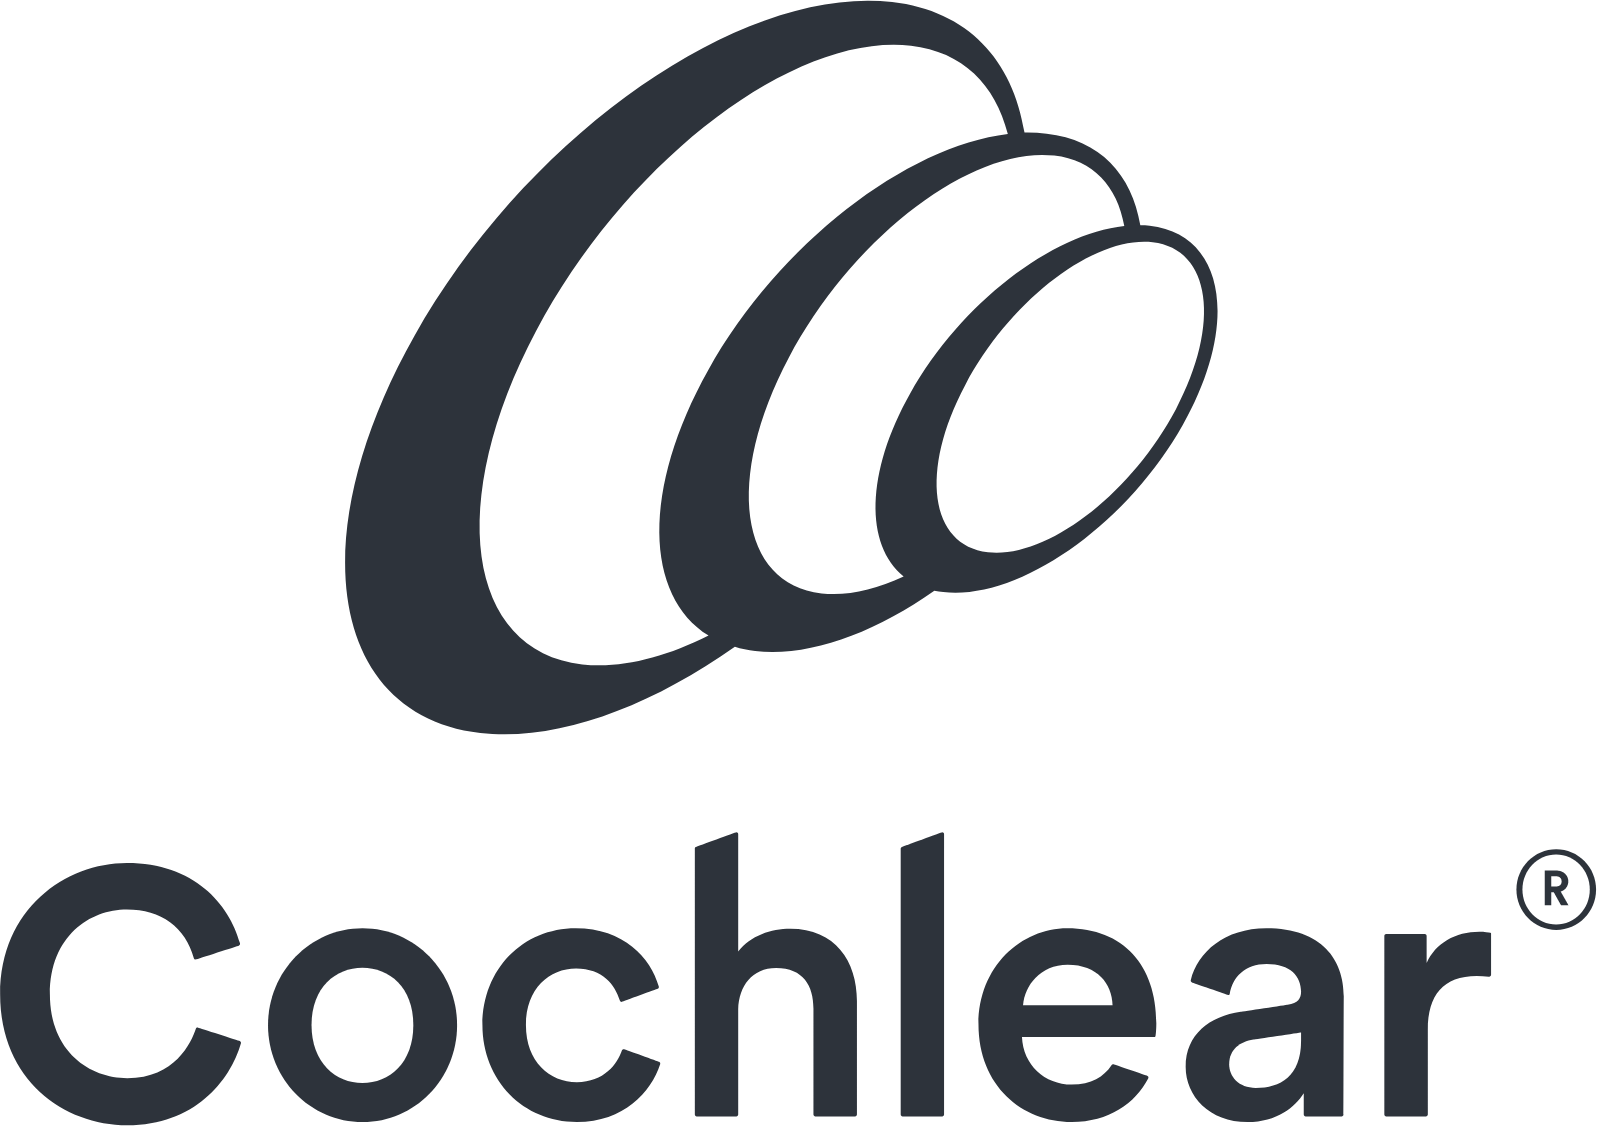 Cochlear Limited It companies in Australia